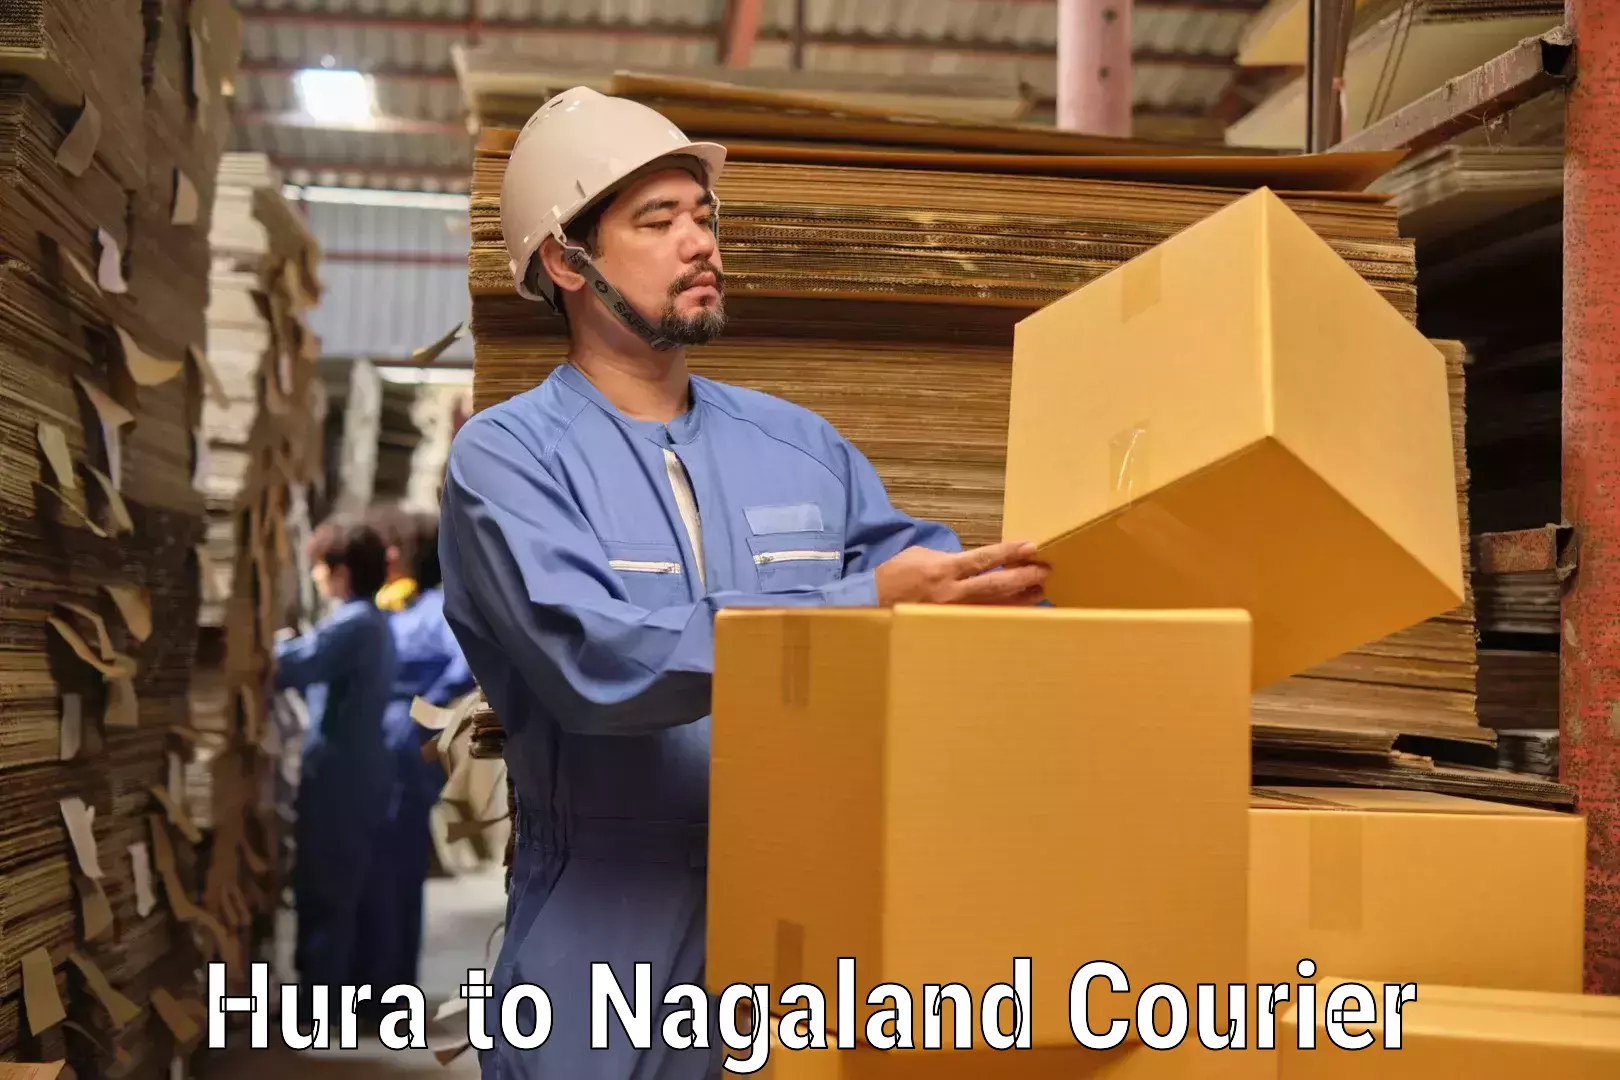 High-priority parcel service Hura to Nagaland